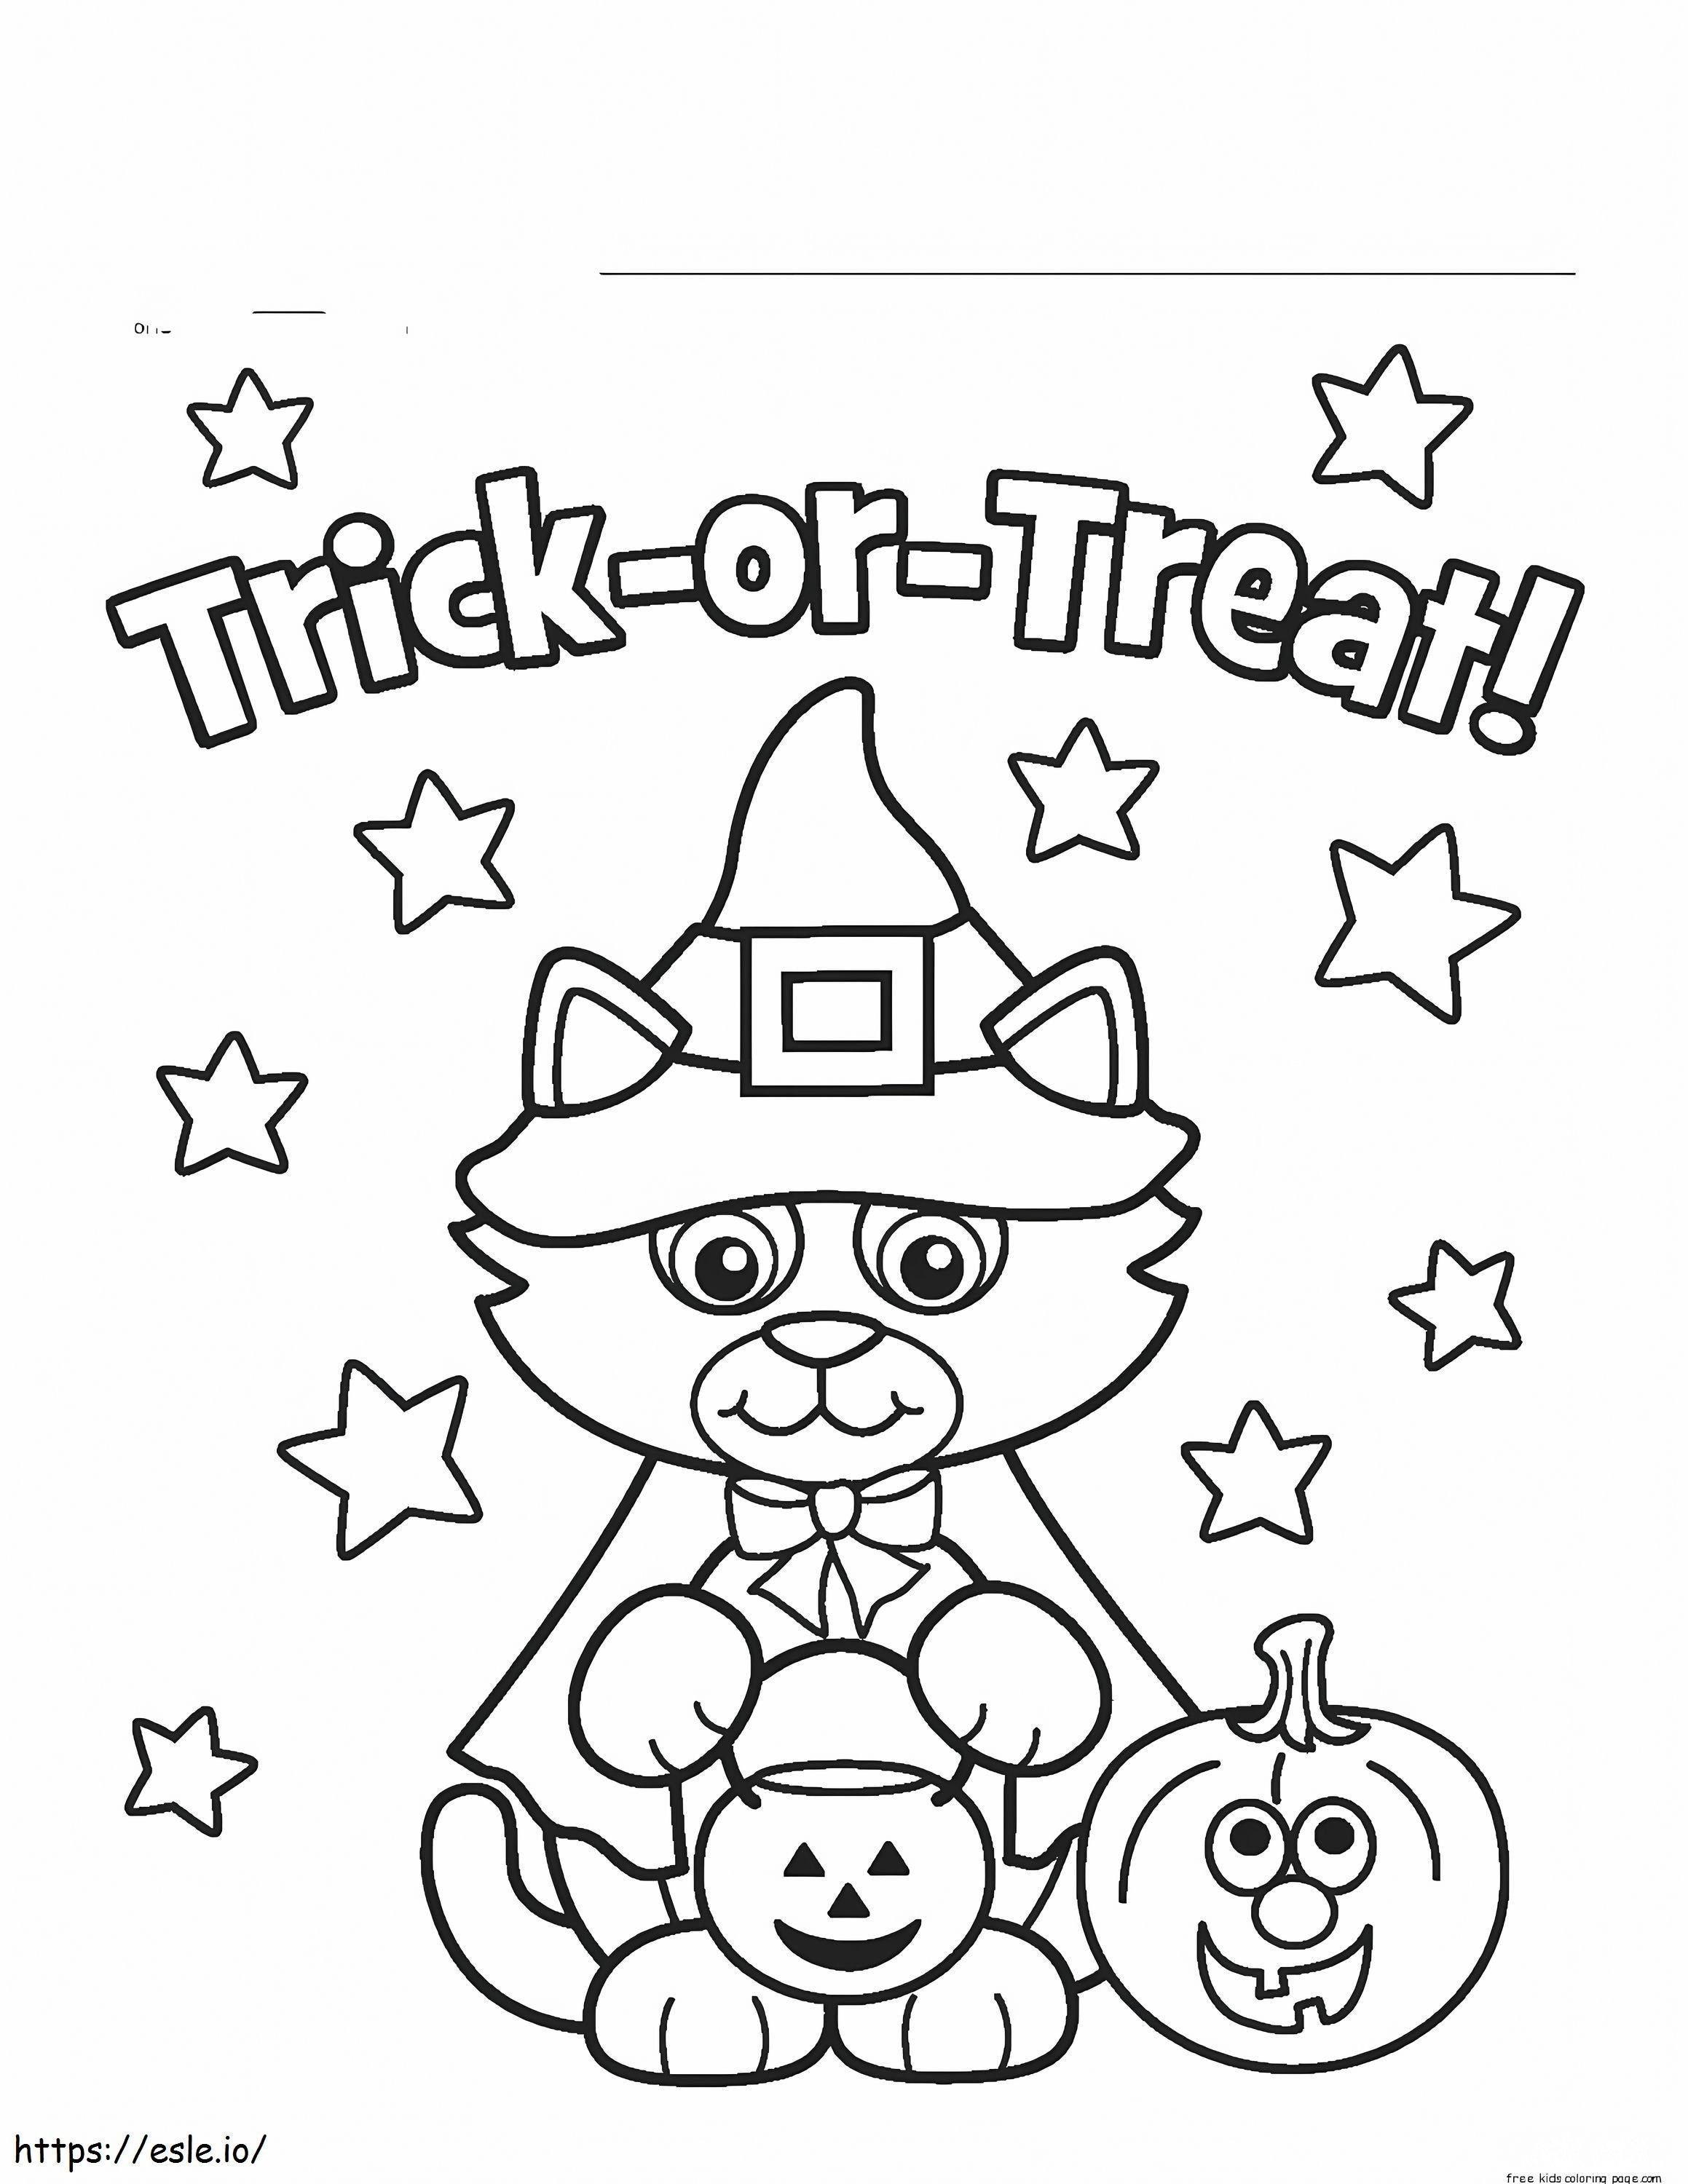 Toddler Halloween Printable New Halloween Printable Free Manqal Hellenes Of Toddler Halloween Printable coloring page